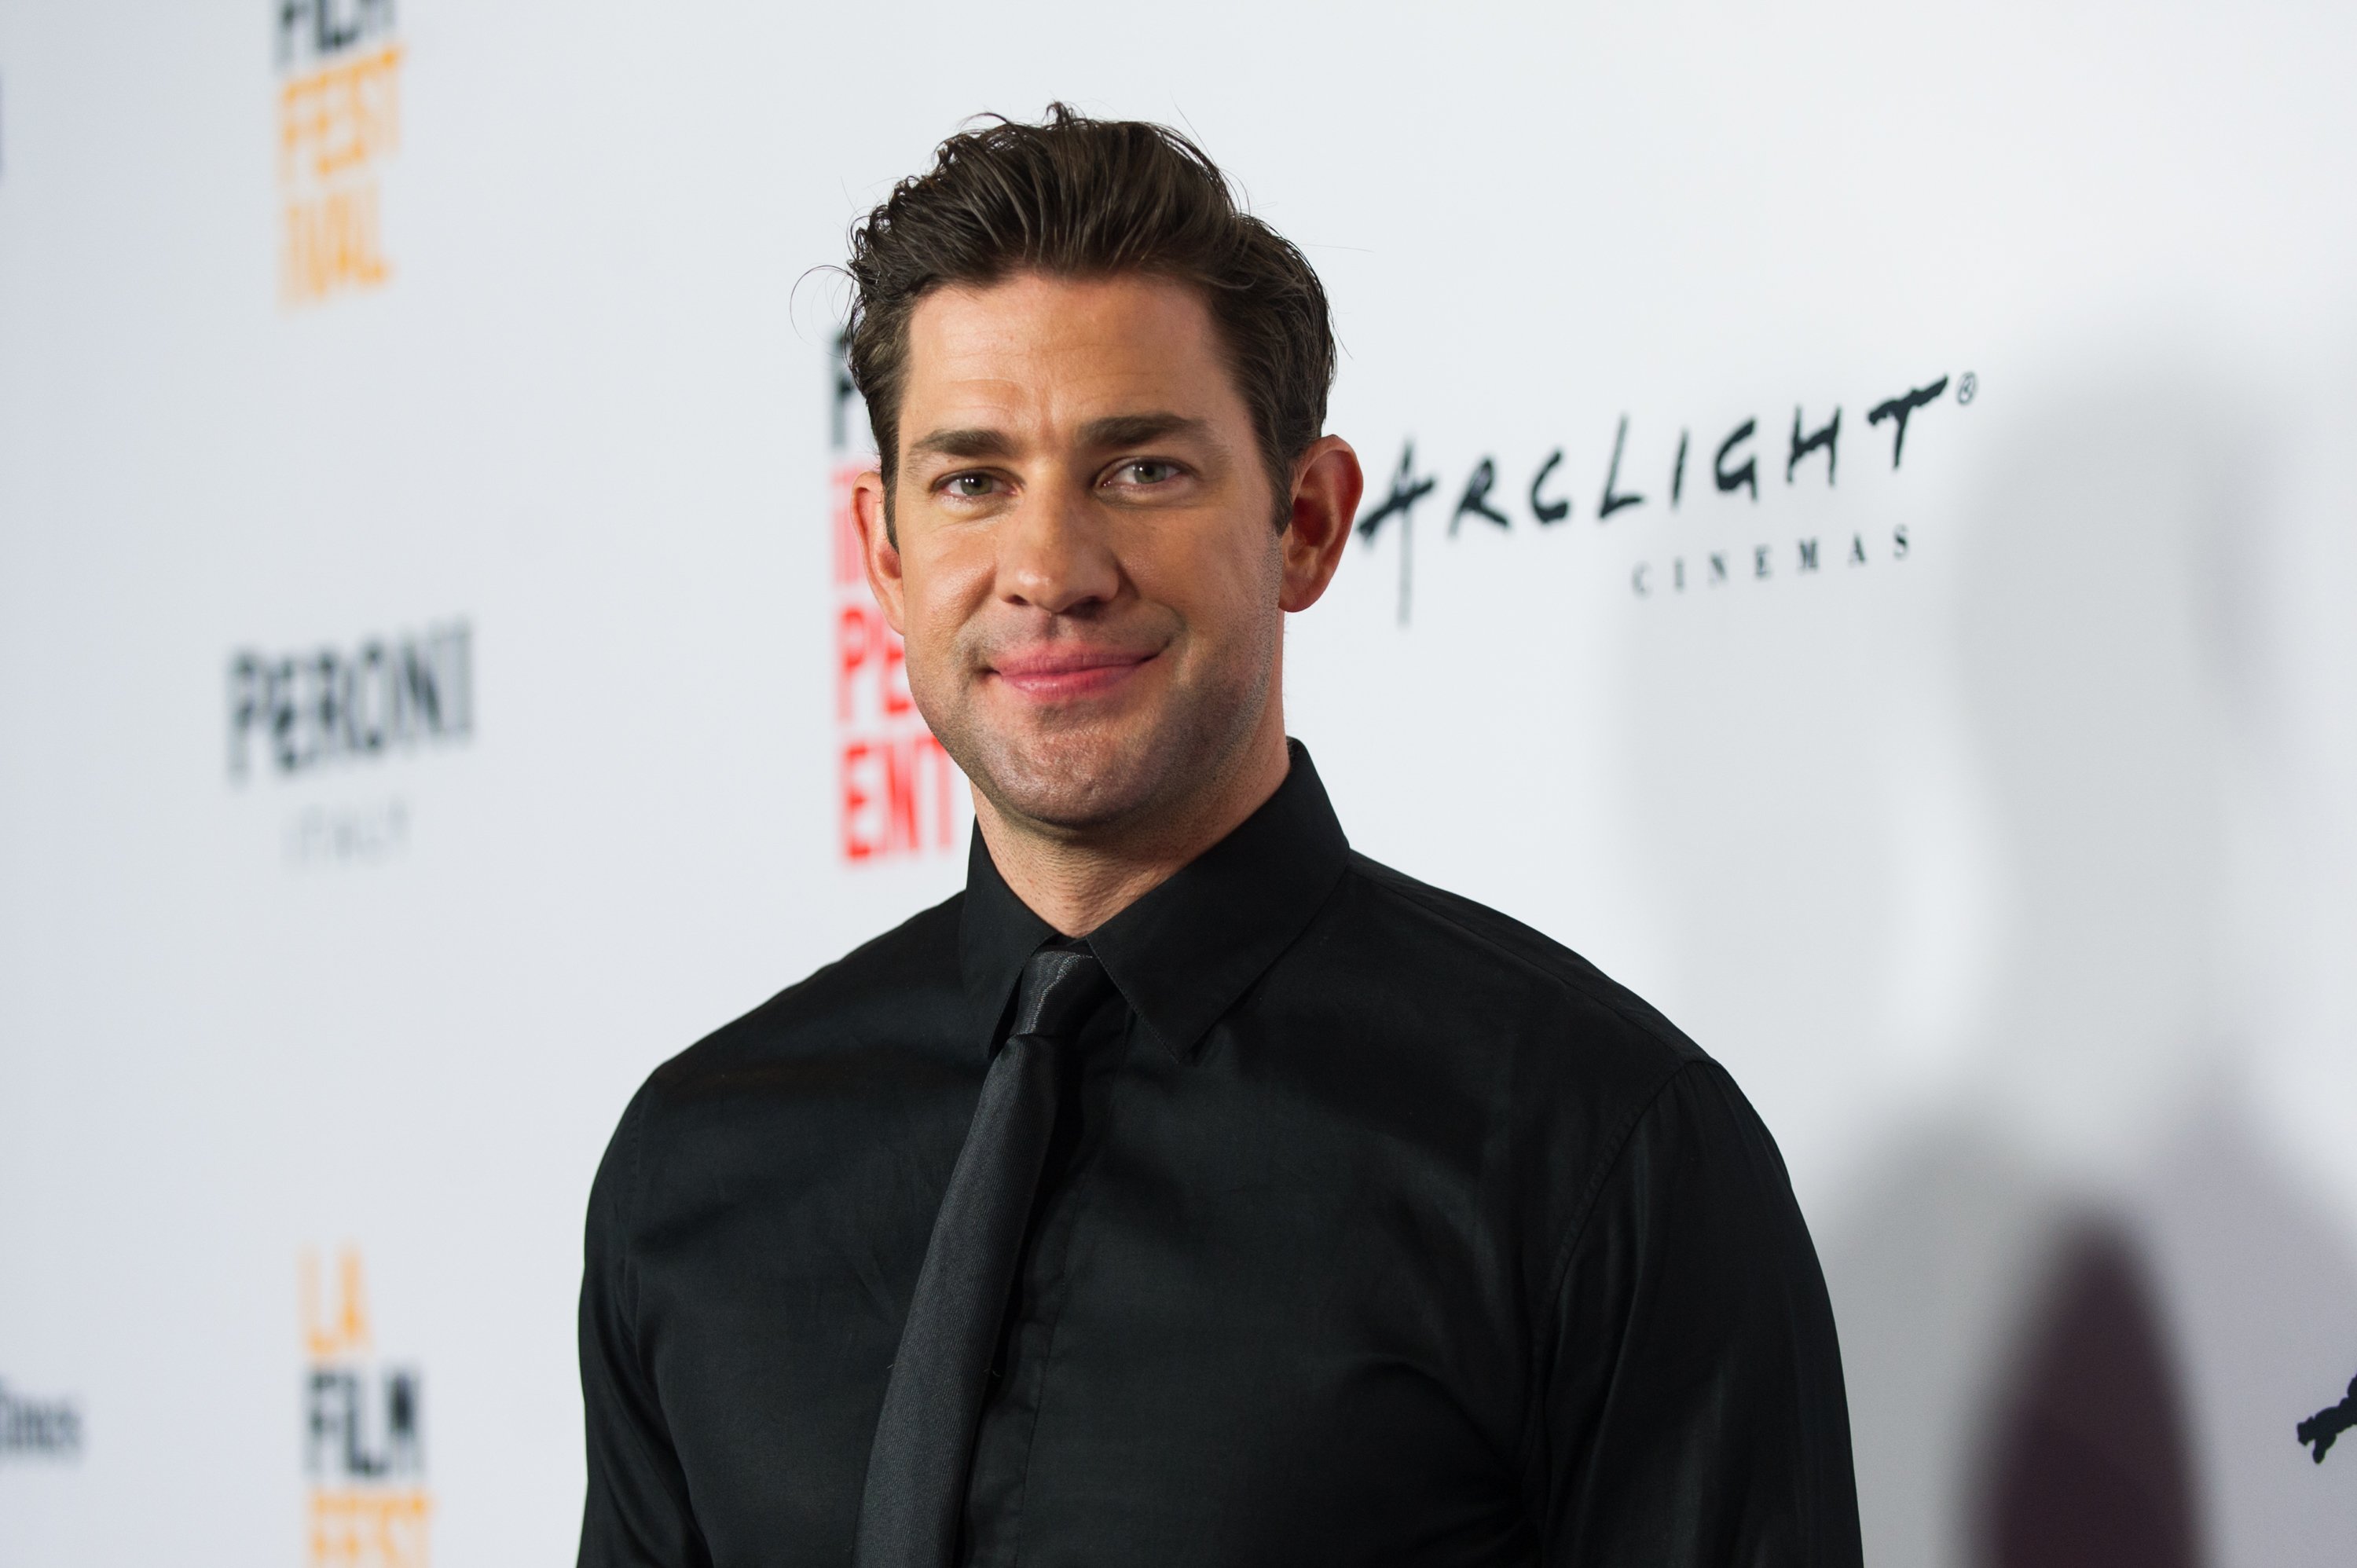 John Krasinski poses at the premiere of "The Hollers" during the 2016 Los Angeles Film Festival at ArcLight Cinemas on June 3, 2016, in Culver City, California | Source: Getty Images